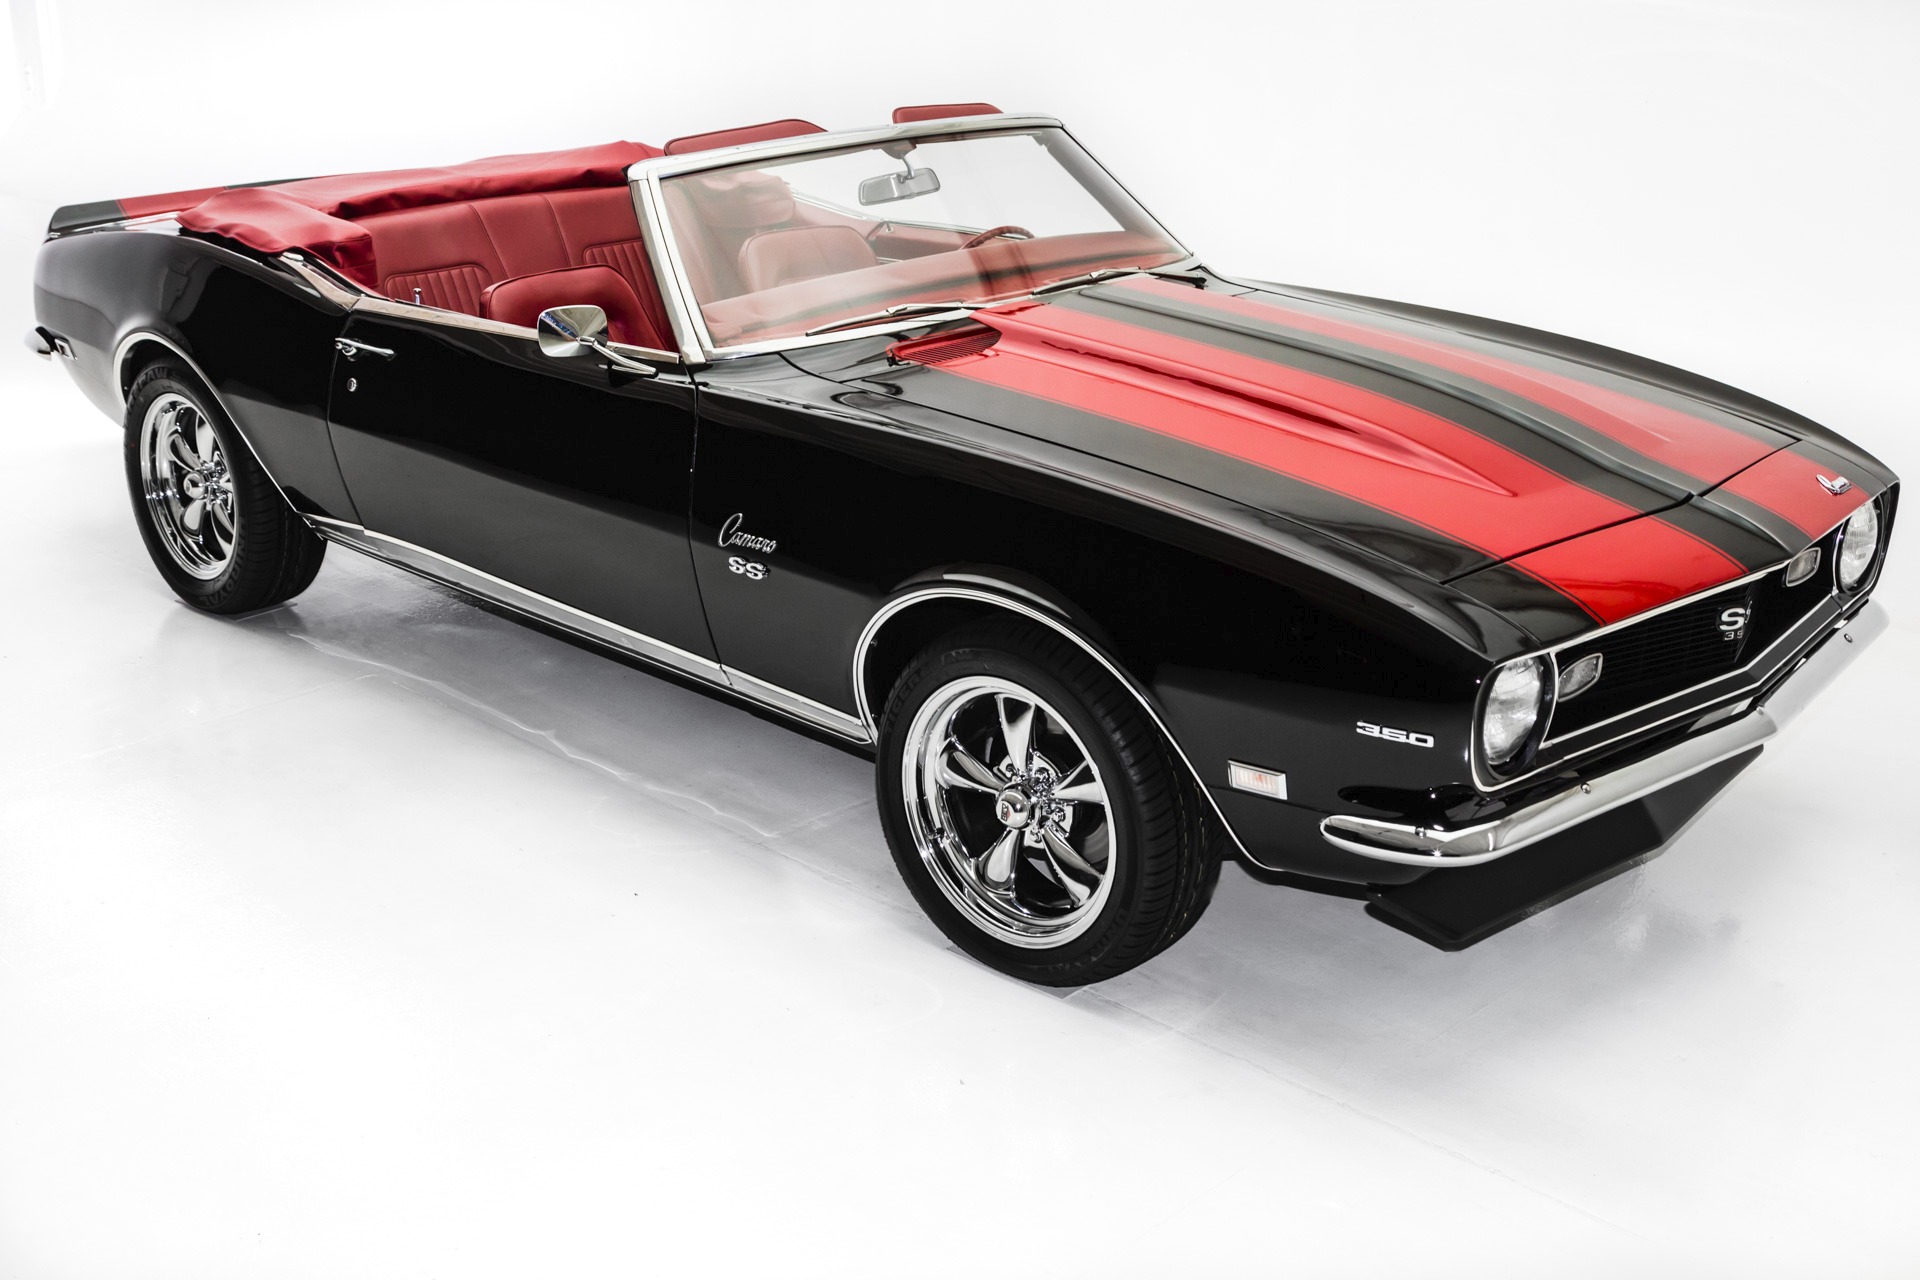 For Sale Used 1968 Chevrolet Camaro Convertible 383 Stroker  (WINTER CLEARANCE SALE $44,900) | American Dream Machines Des Moines IA 50309